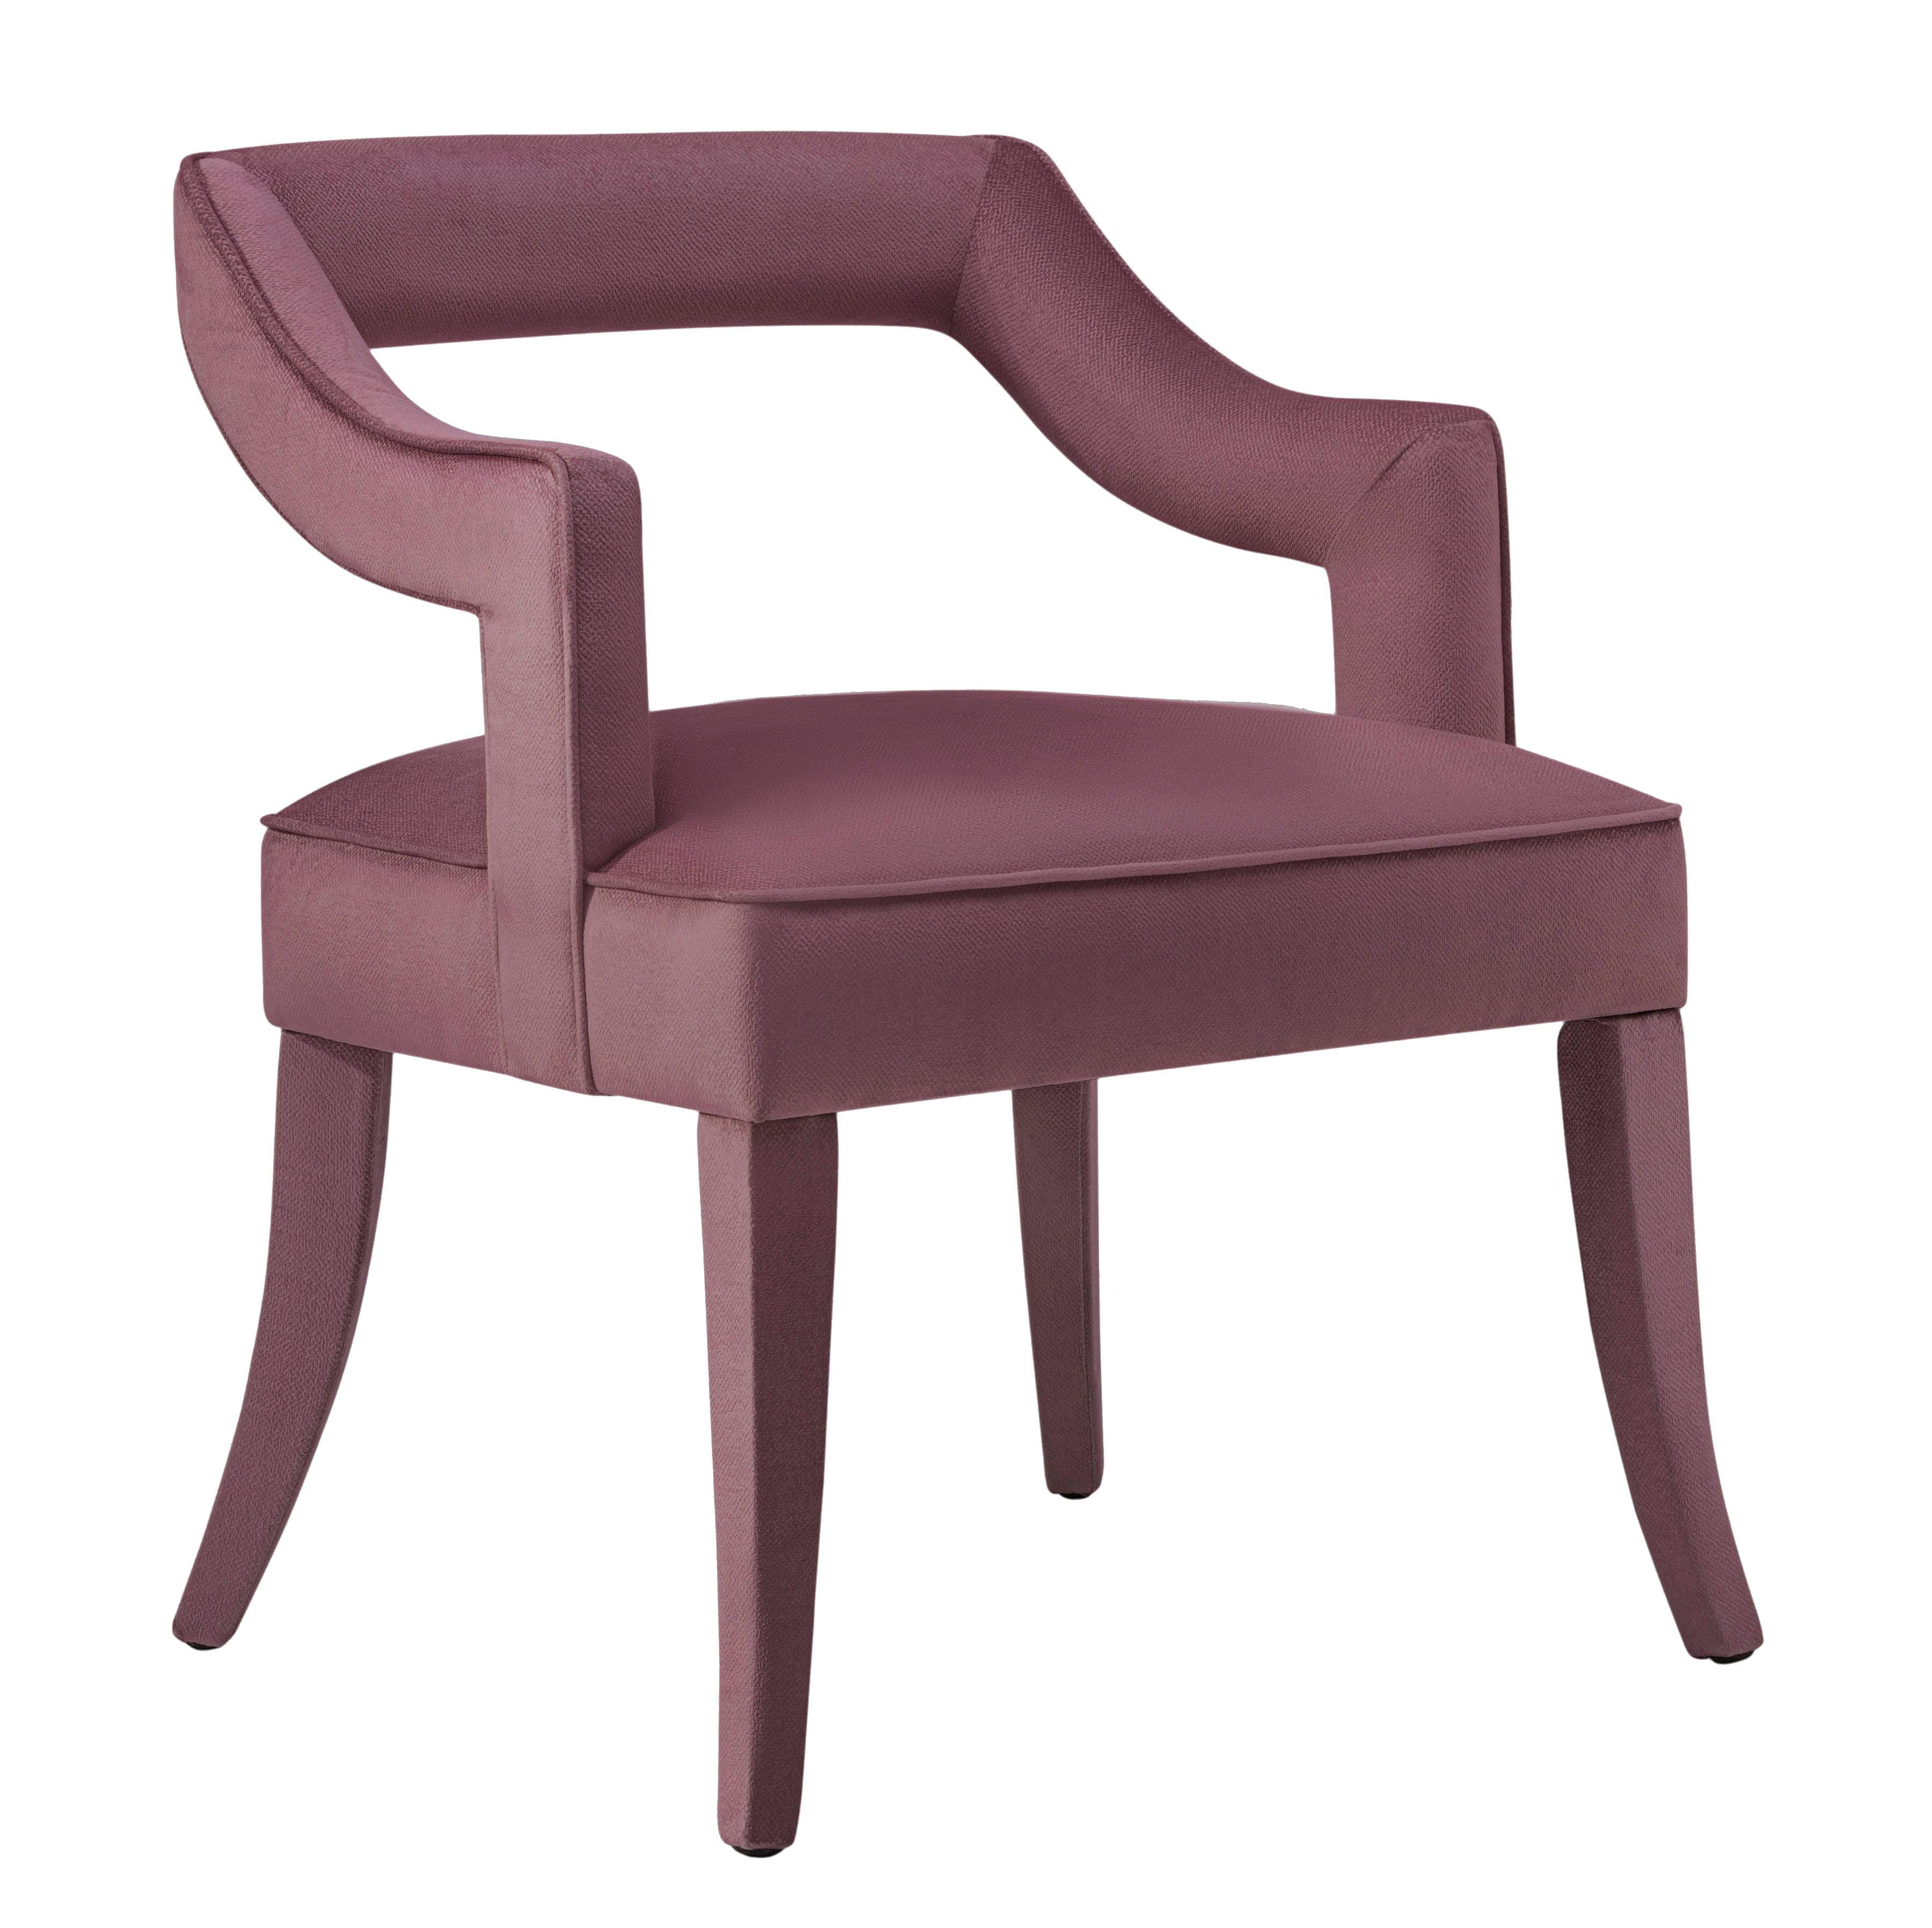 Contemporary Pink Velvet Upholstered Arm Chair with Wood Legs